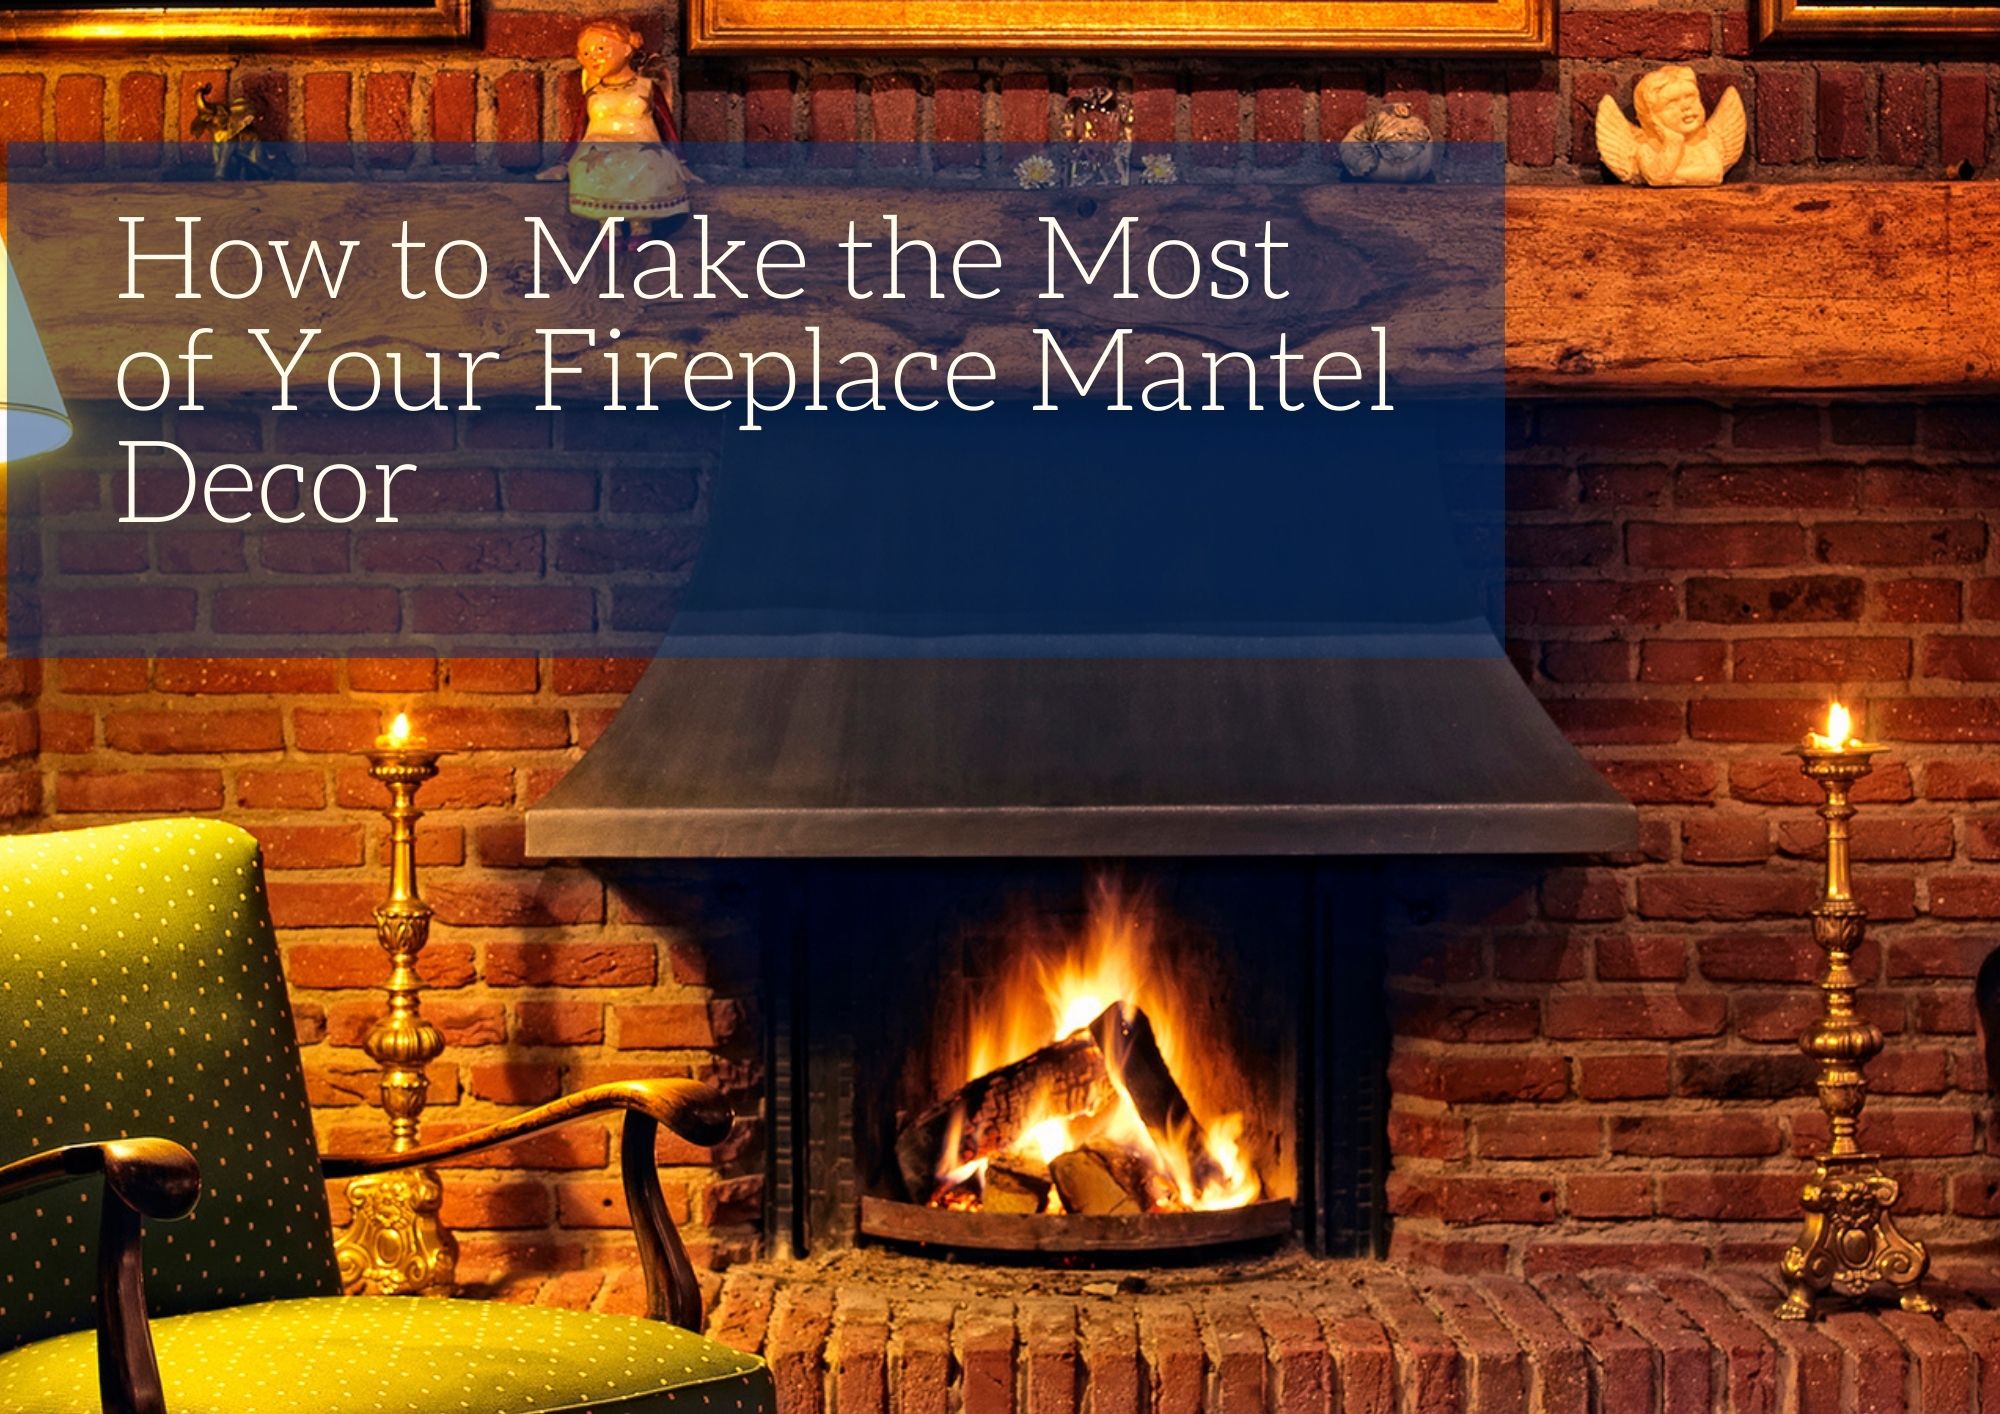 How To Make The Most Of Your Fireplace Mantel Decor